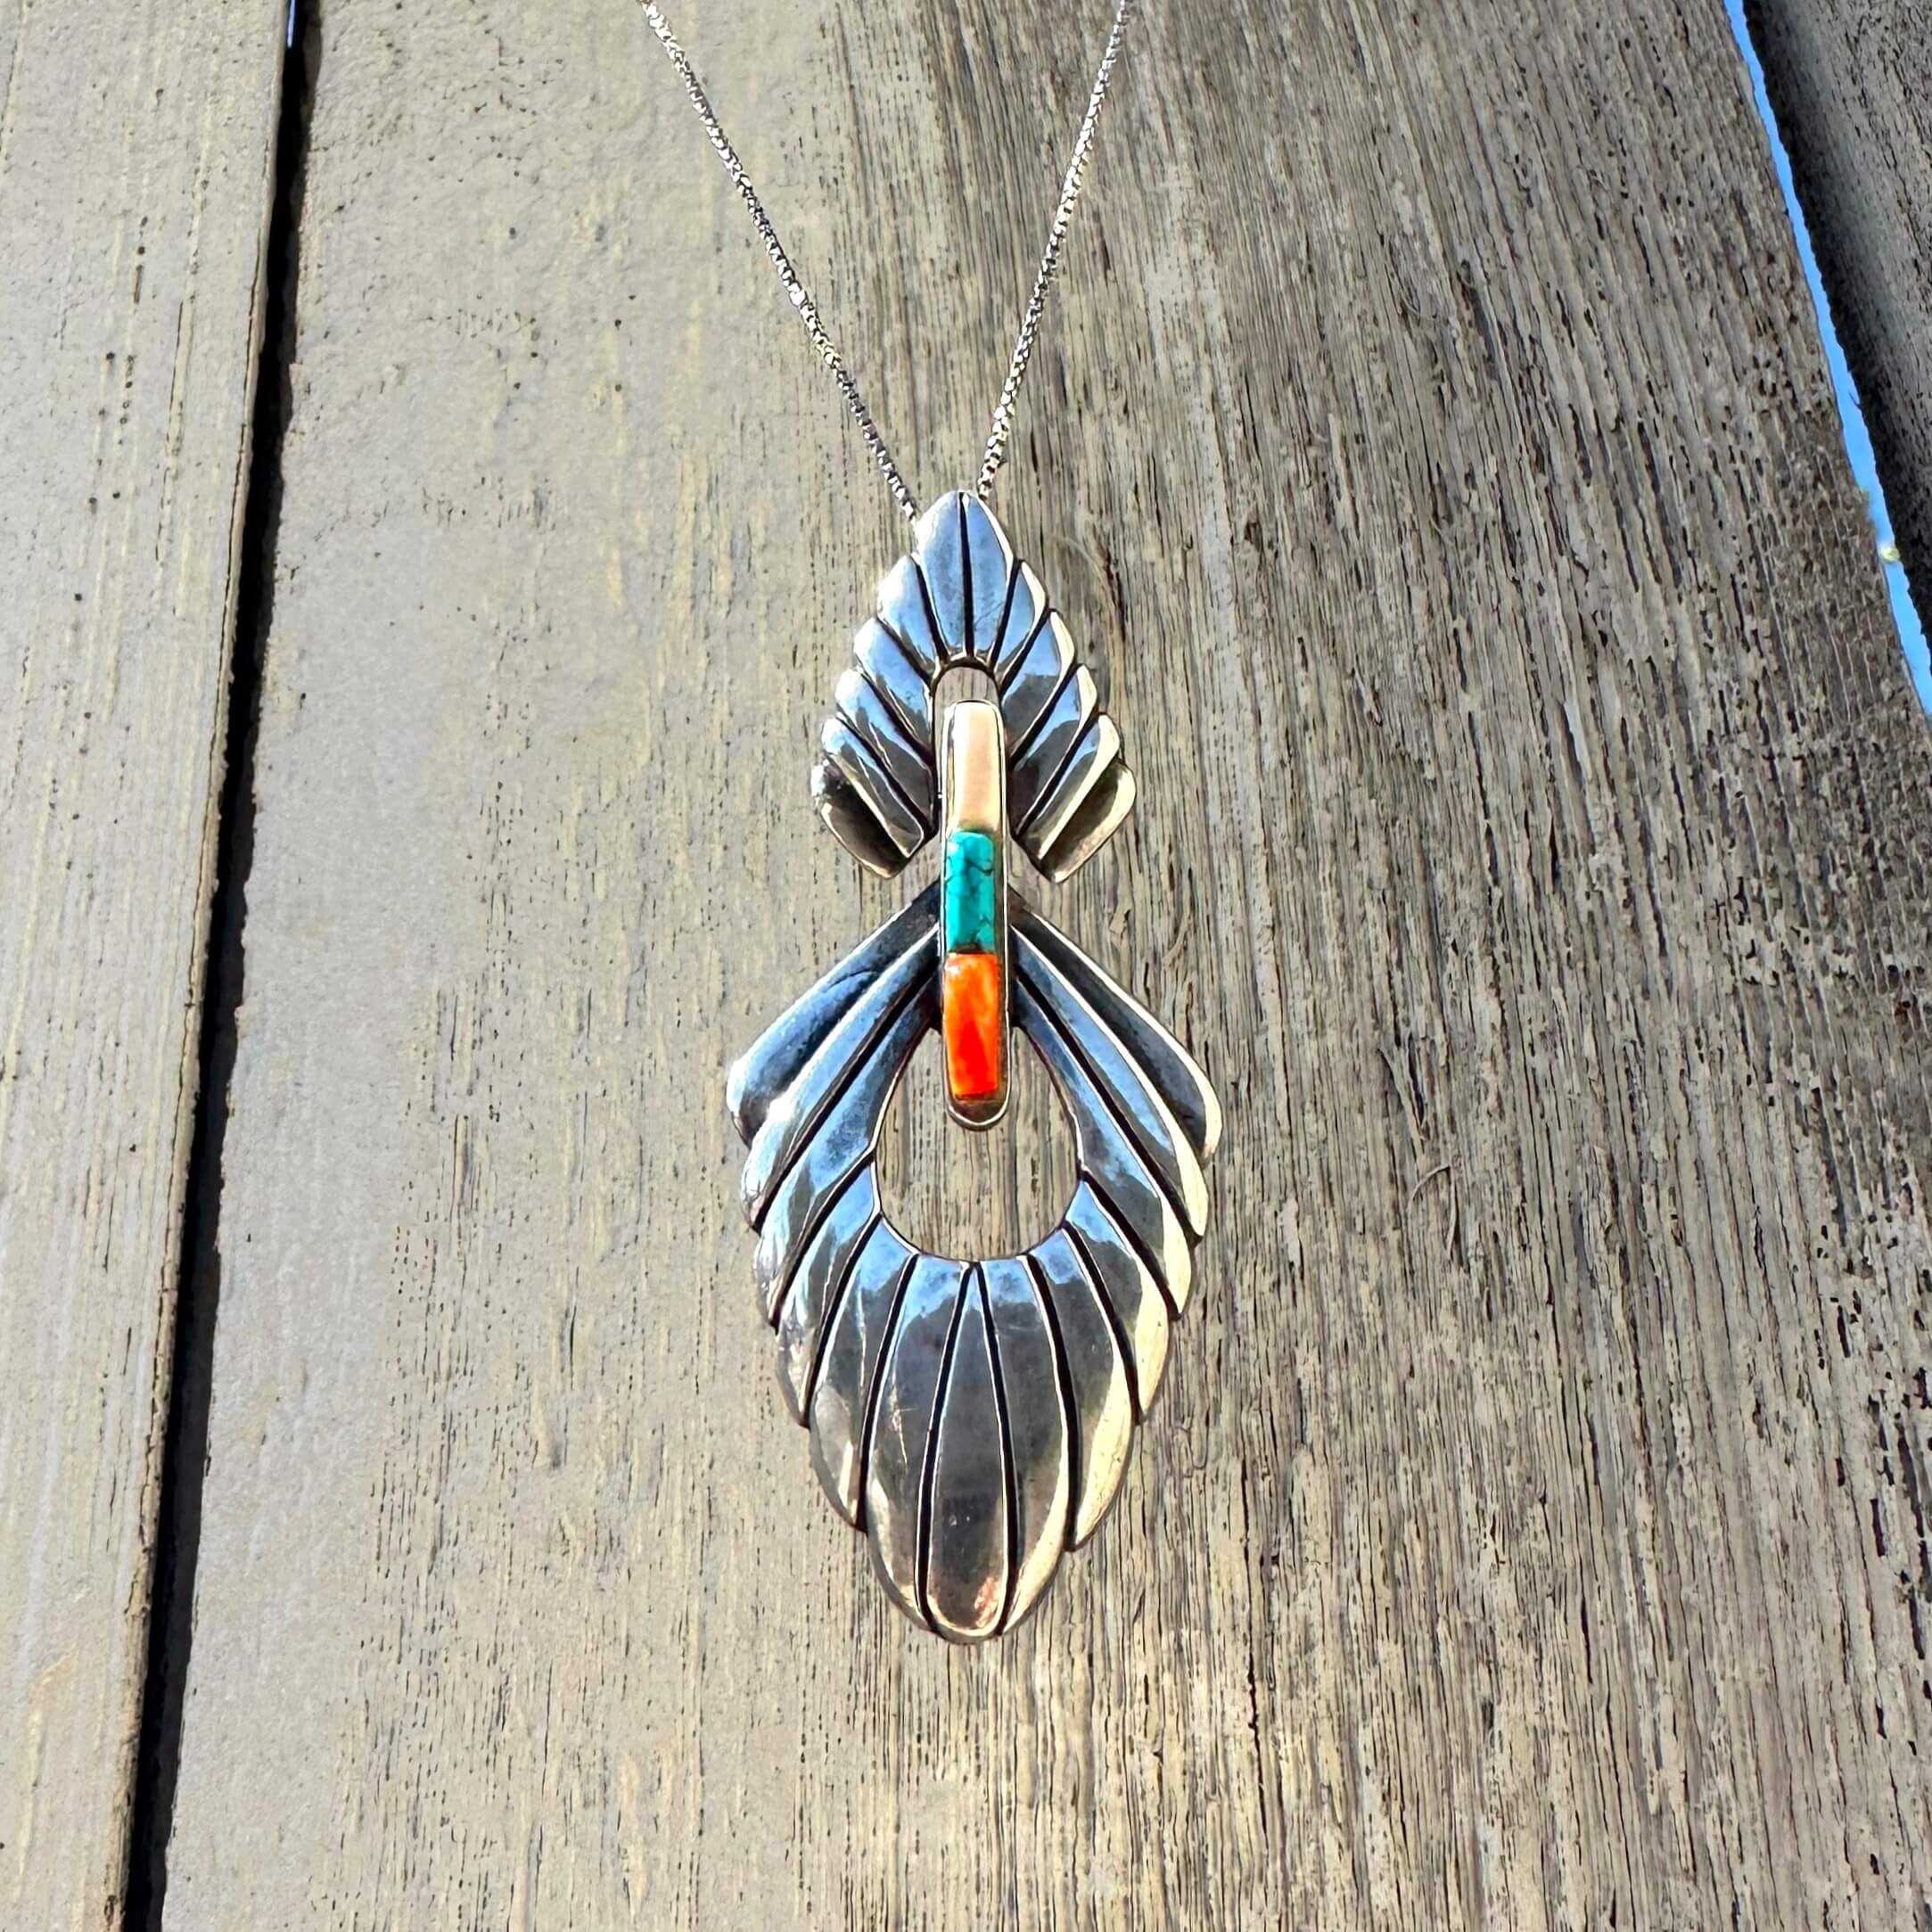 Native Sterling Silver Necklace Signed by ChaRay w/ White Coral, Turquoise, and Spiny Oyster Gemstones